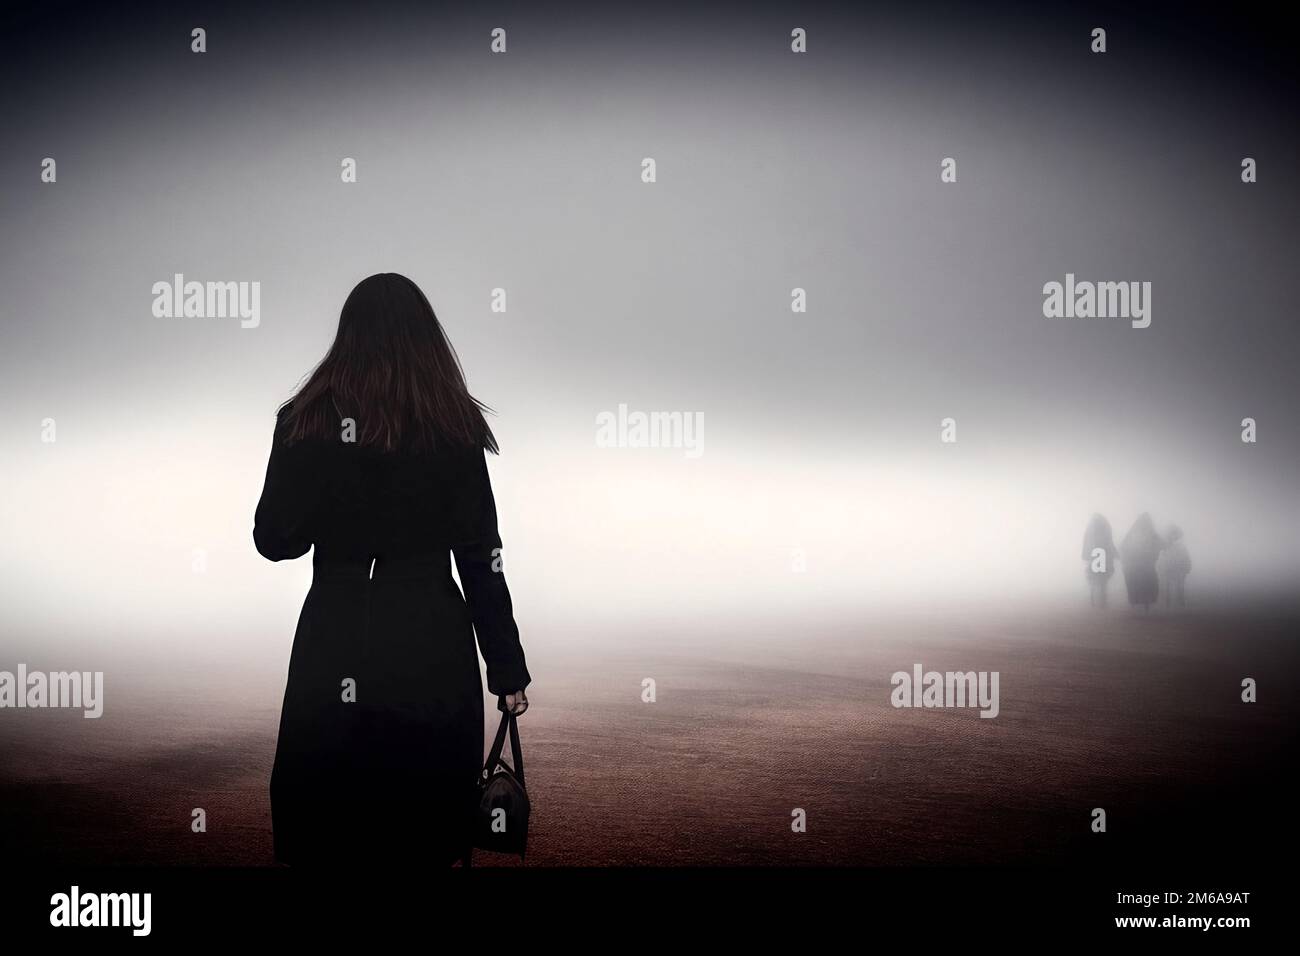 Eerie abstract representation of the back view of a woman with long hair striding through a foggy world toward a blurred group of people, made with ge Stock Photo